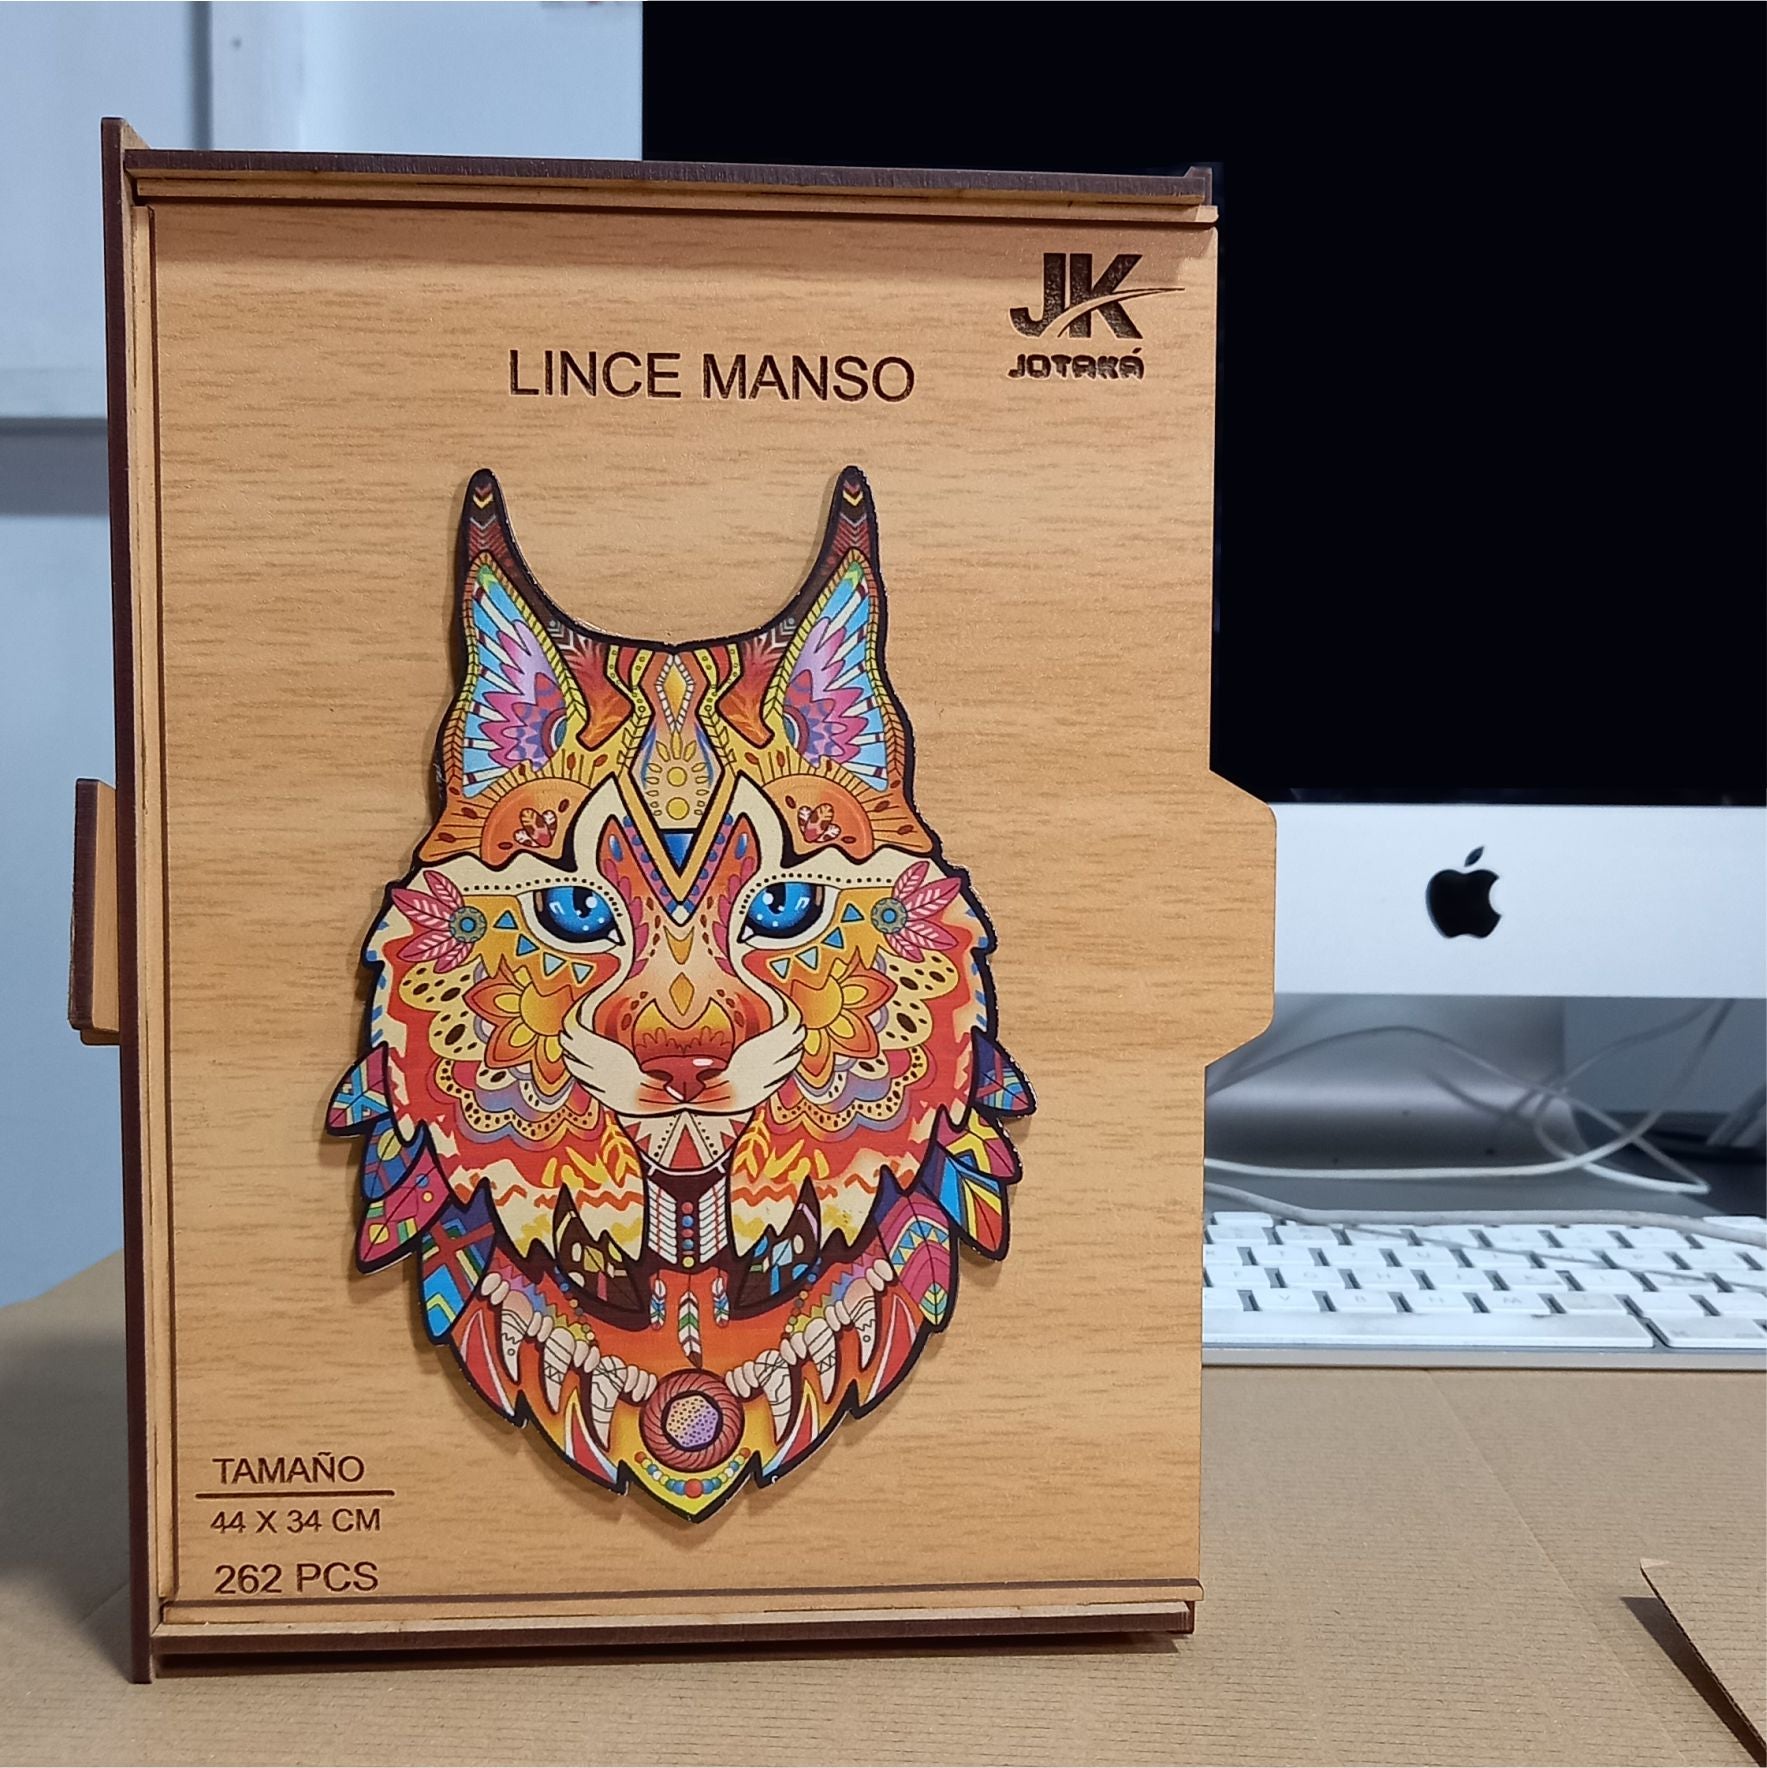 LINCE MANSO